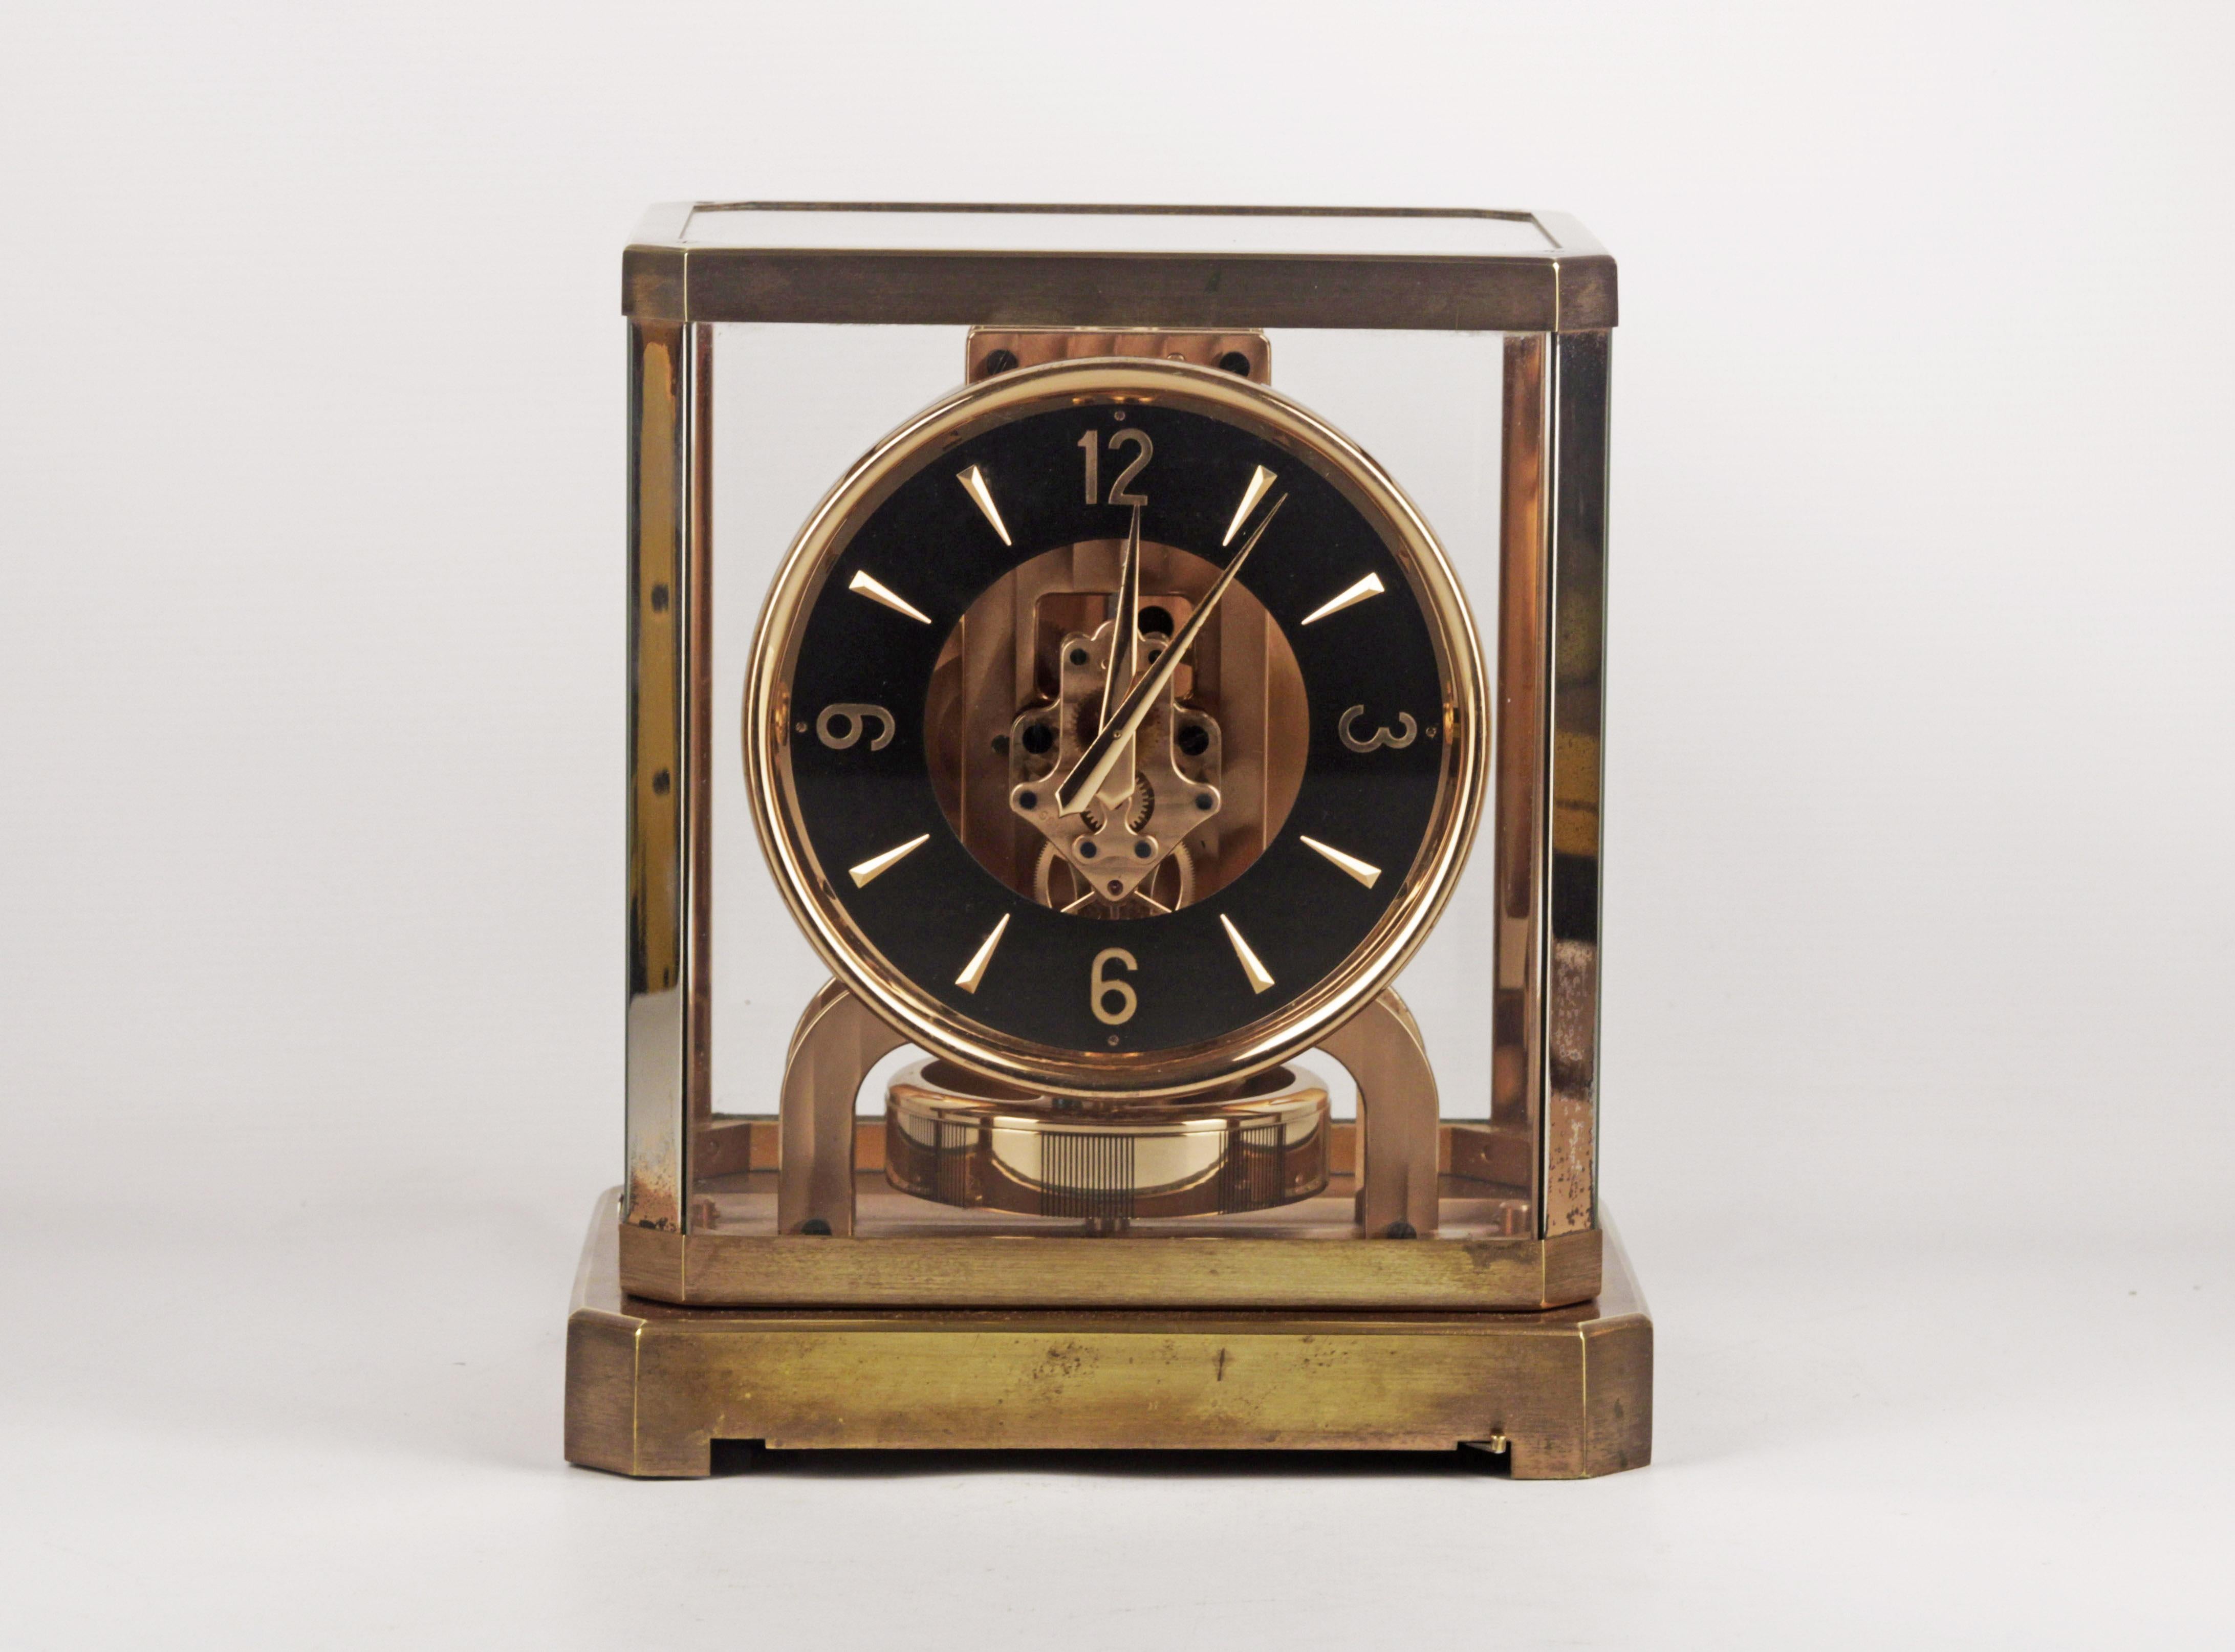 Atmos Jaeger lecoultre rare table clock
table clock with perpetual motion
invented by jean reutter in 1928
This watch is circa 1940 pink plated
the clock is ticking
It has the original black color dial
It has some natural wear on the